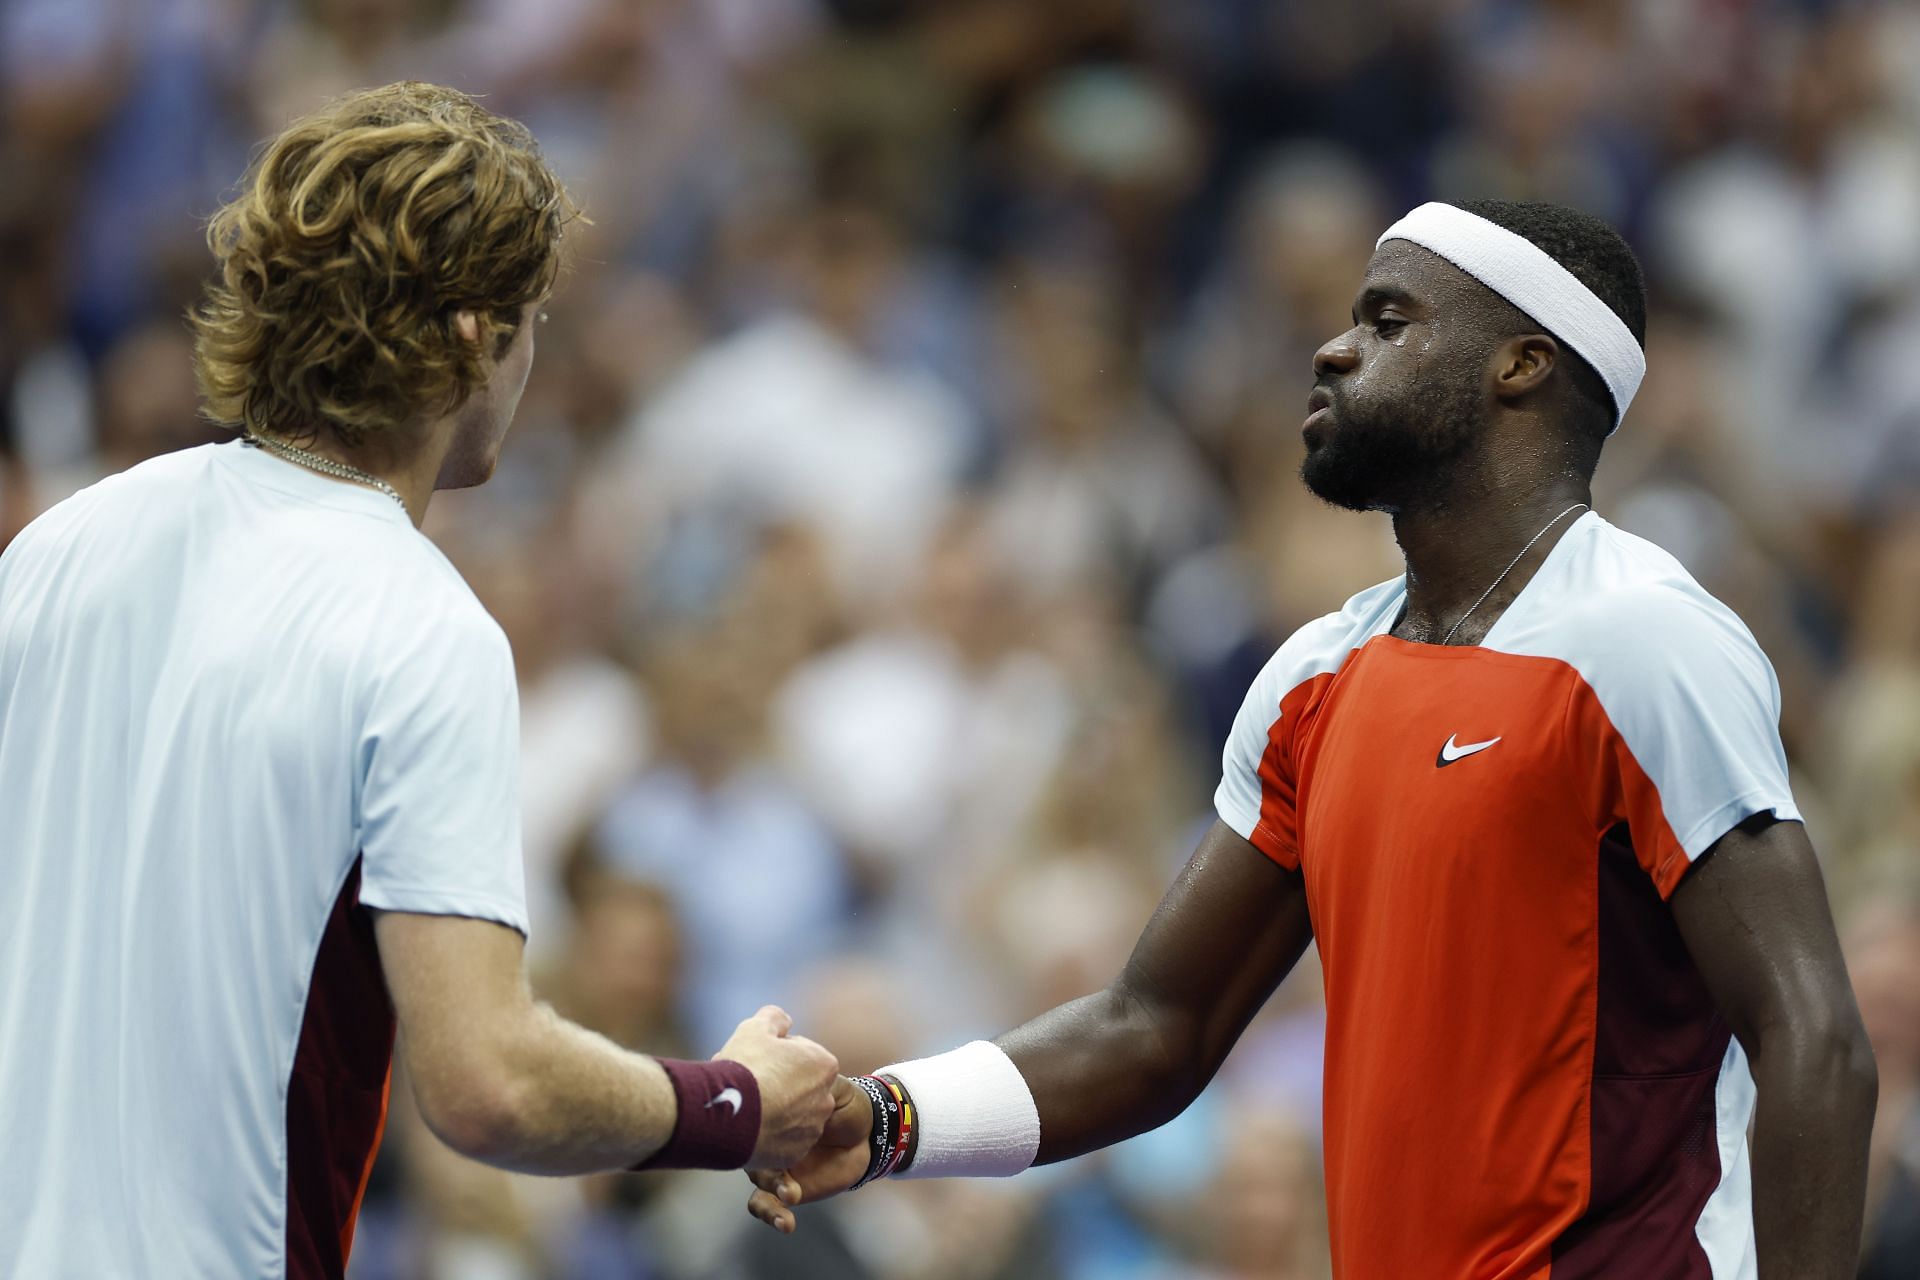 Tiafoe outplays Rublev in New York